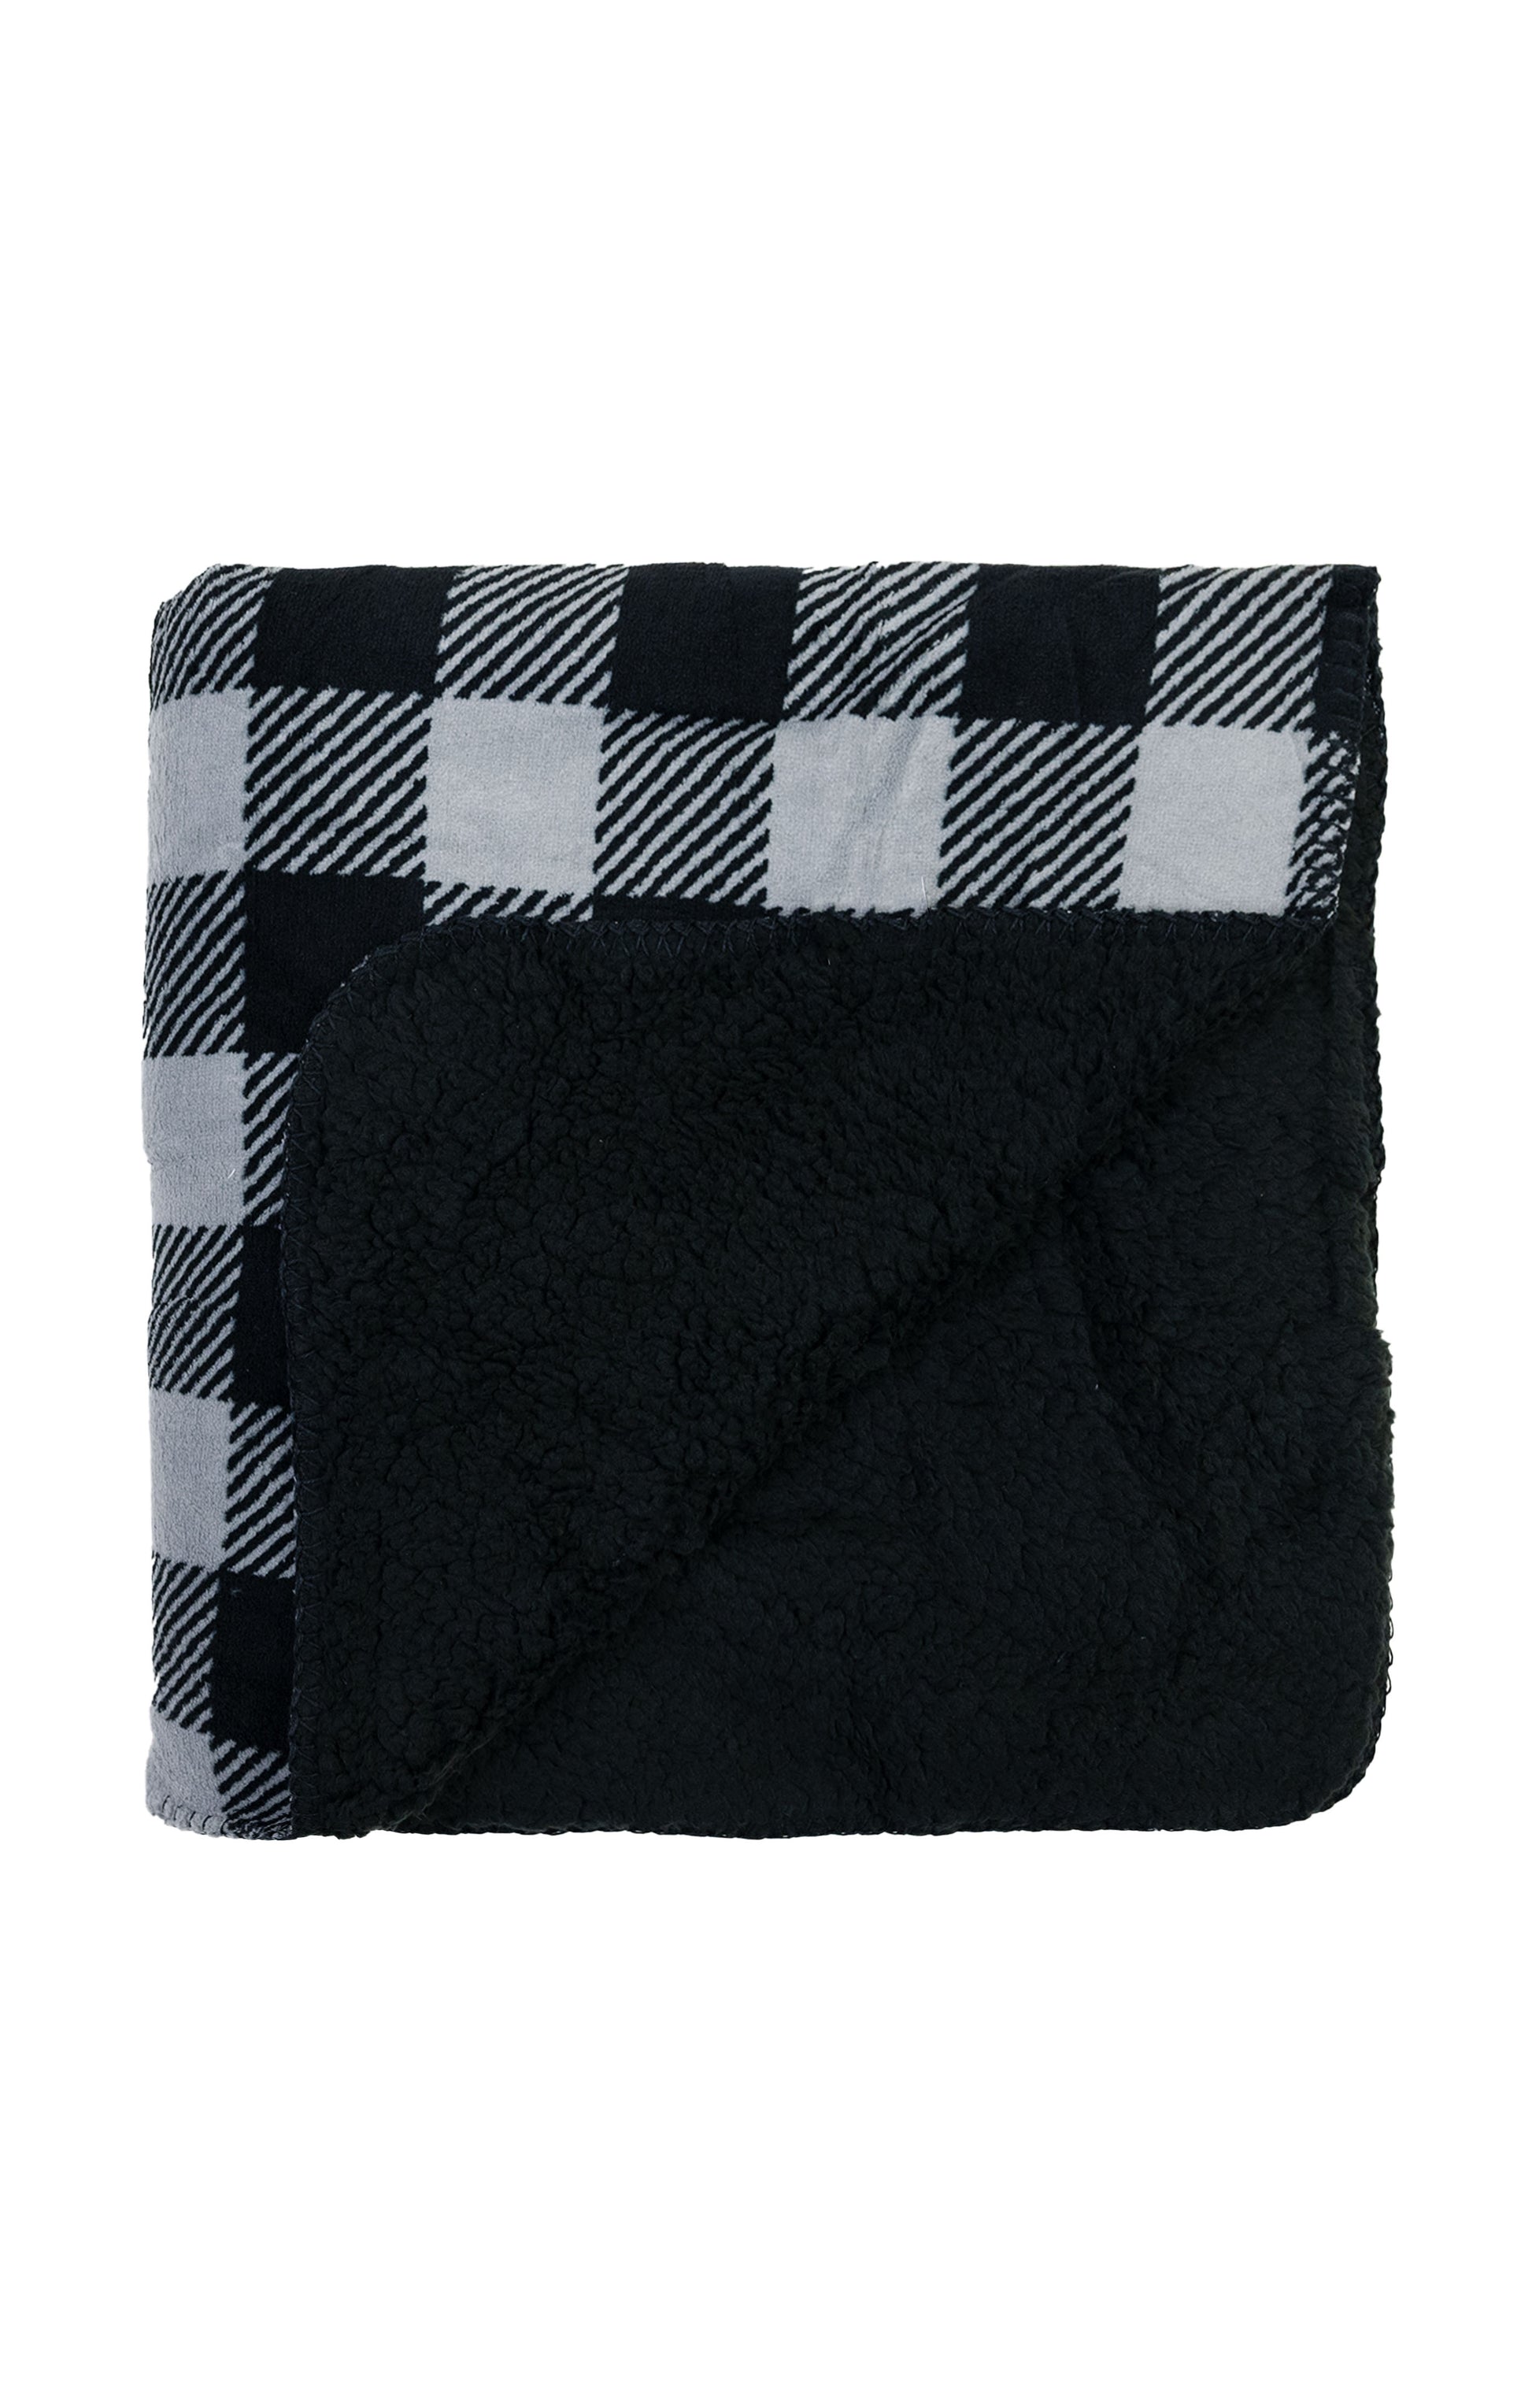 Great Northern Plaid Faux Shearling Throw - 120X150 Cm